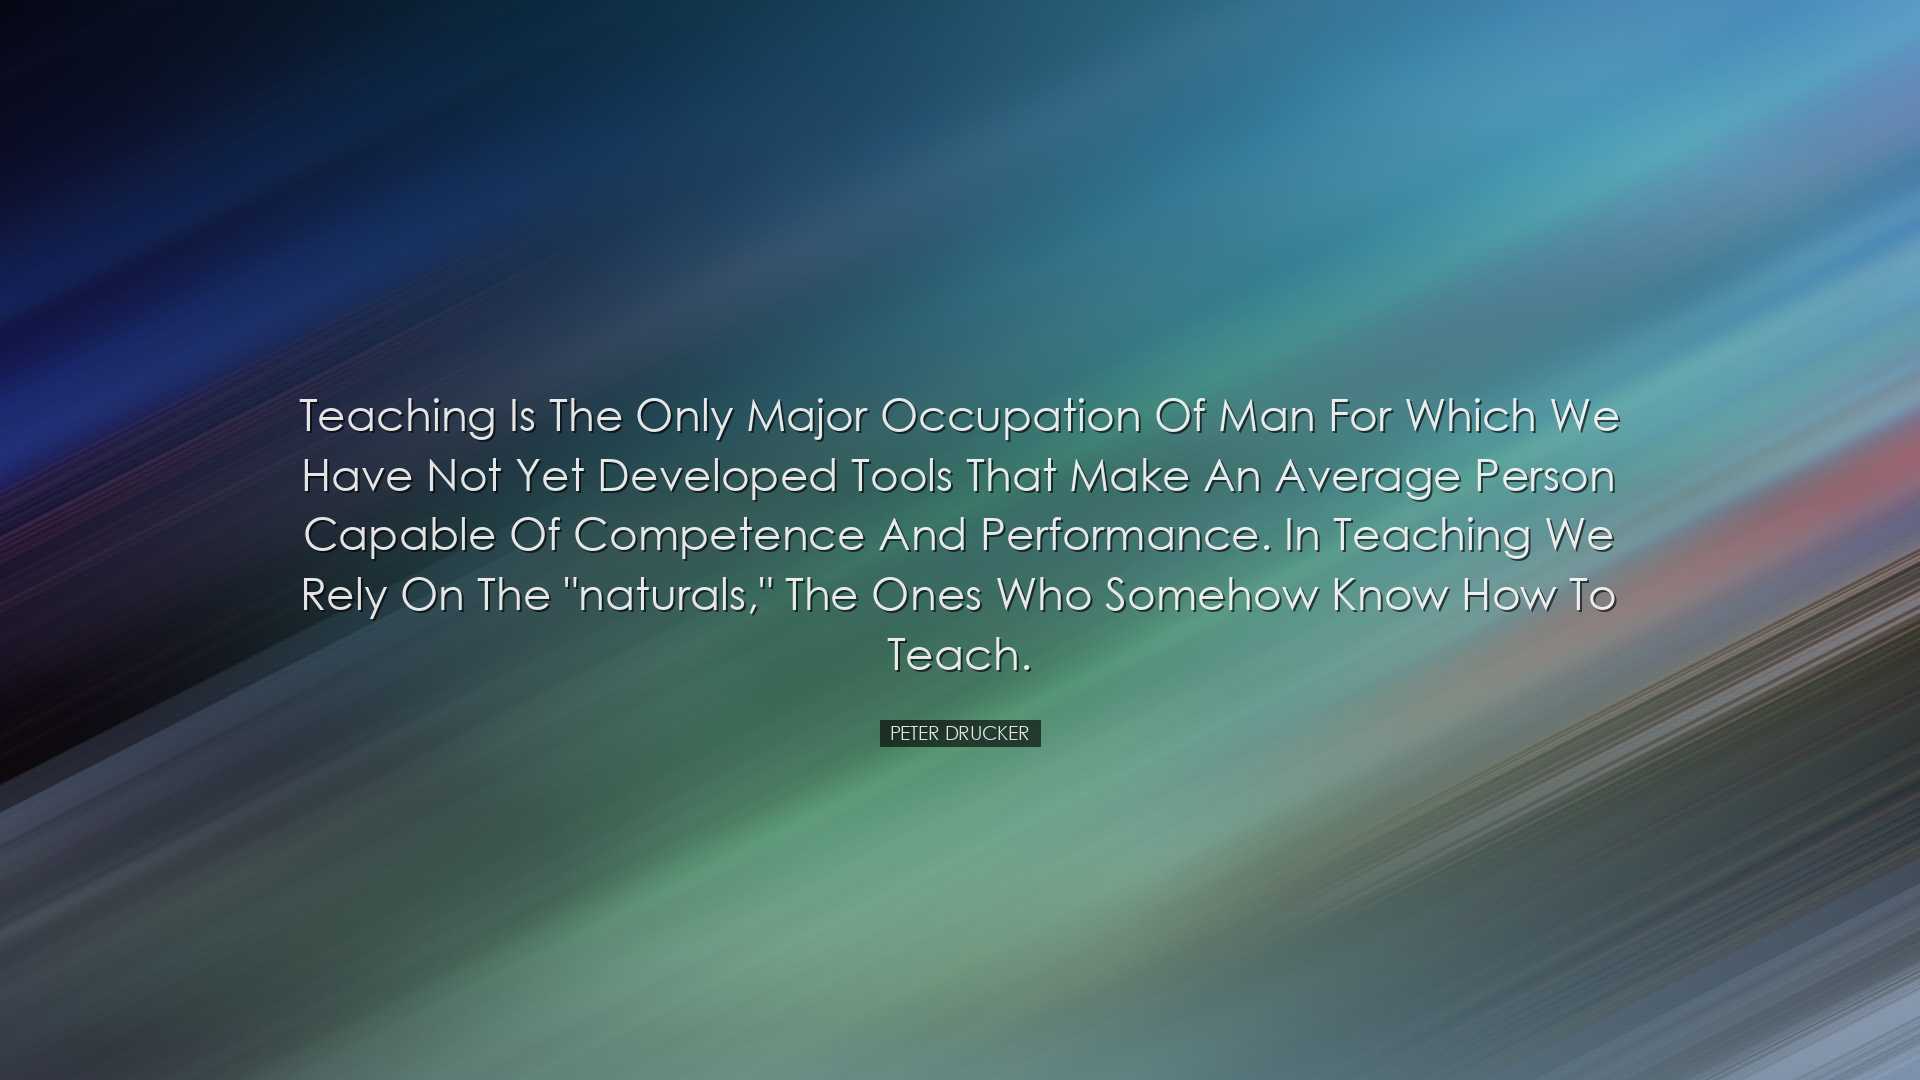 Teaching is the only major occupation of man for which we have not